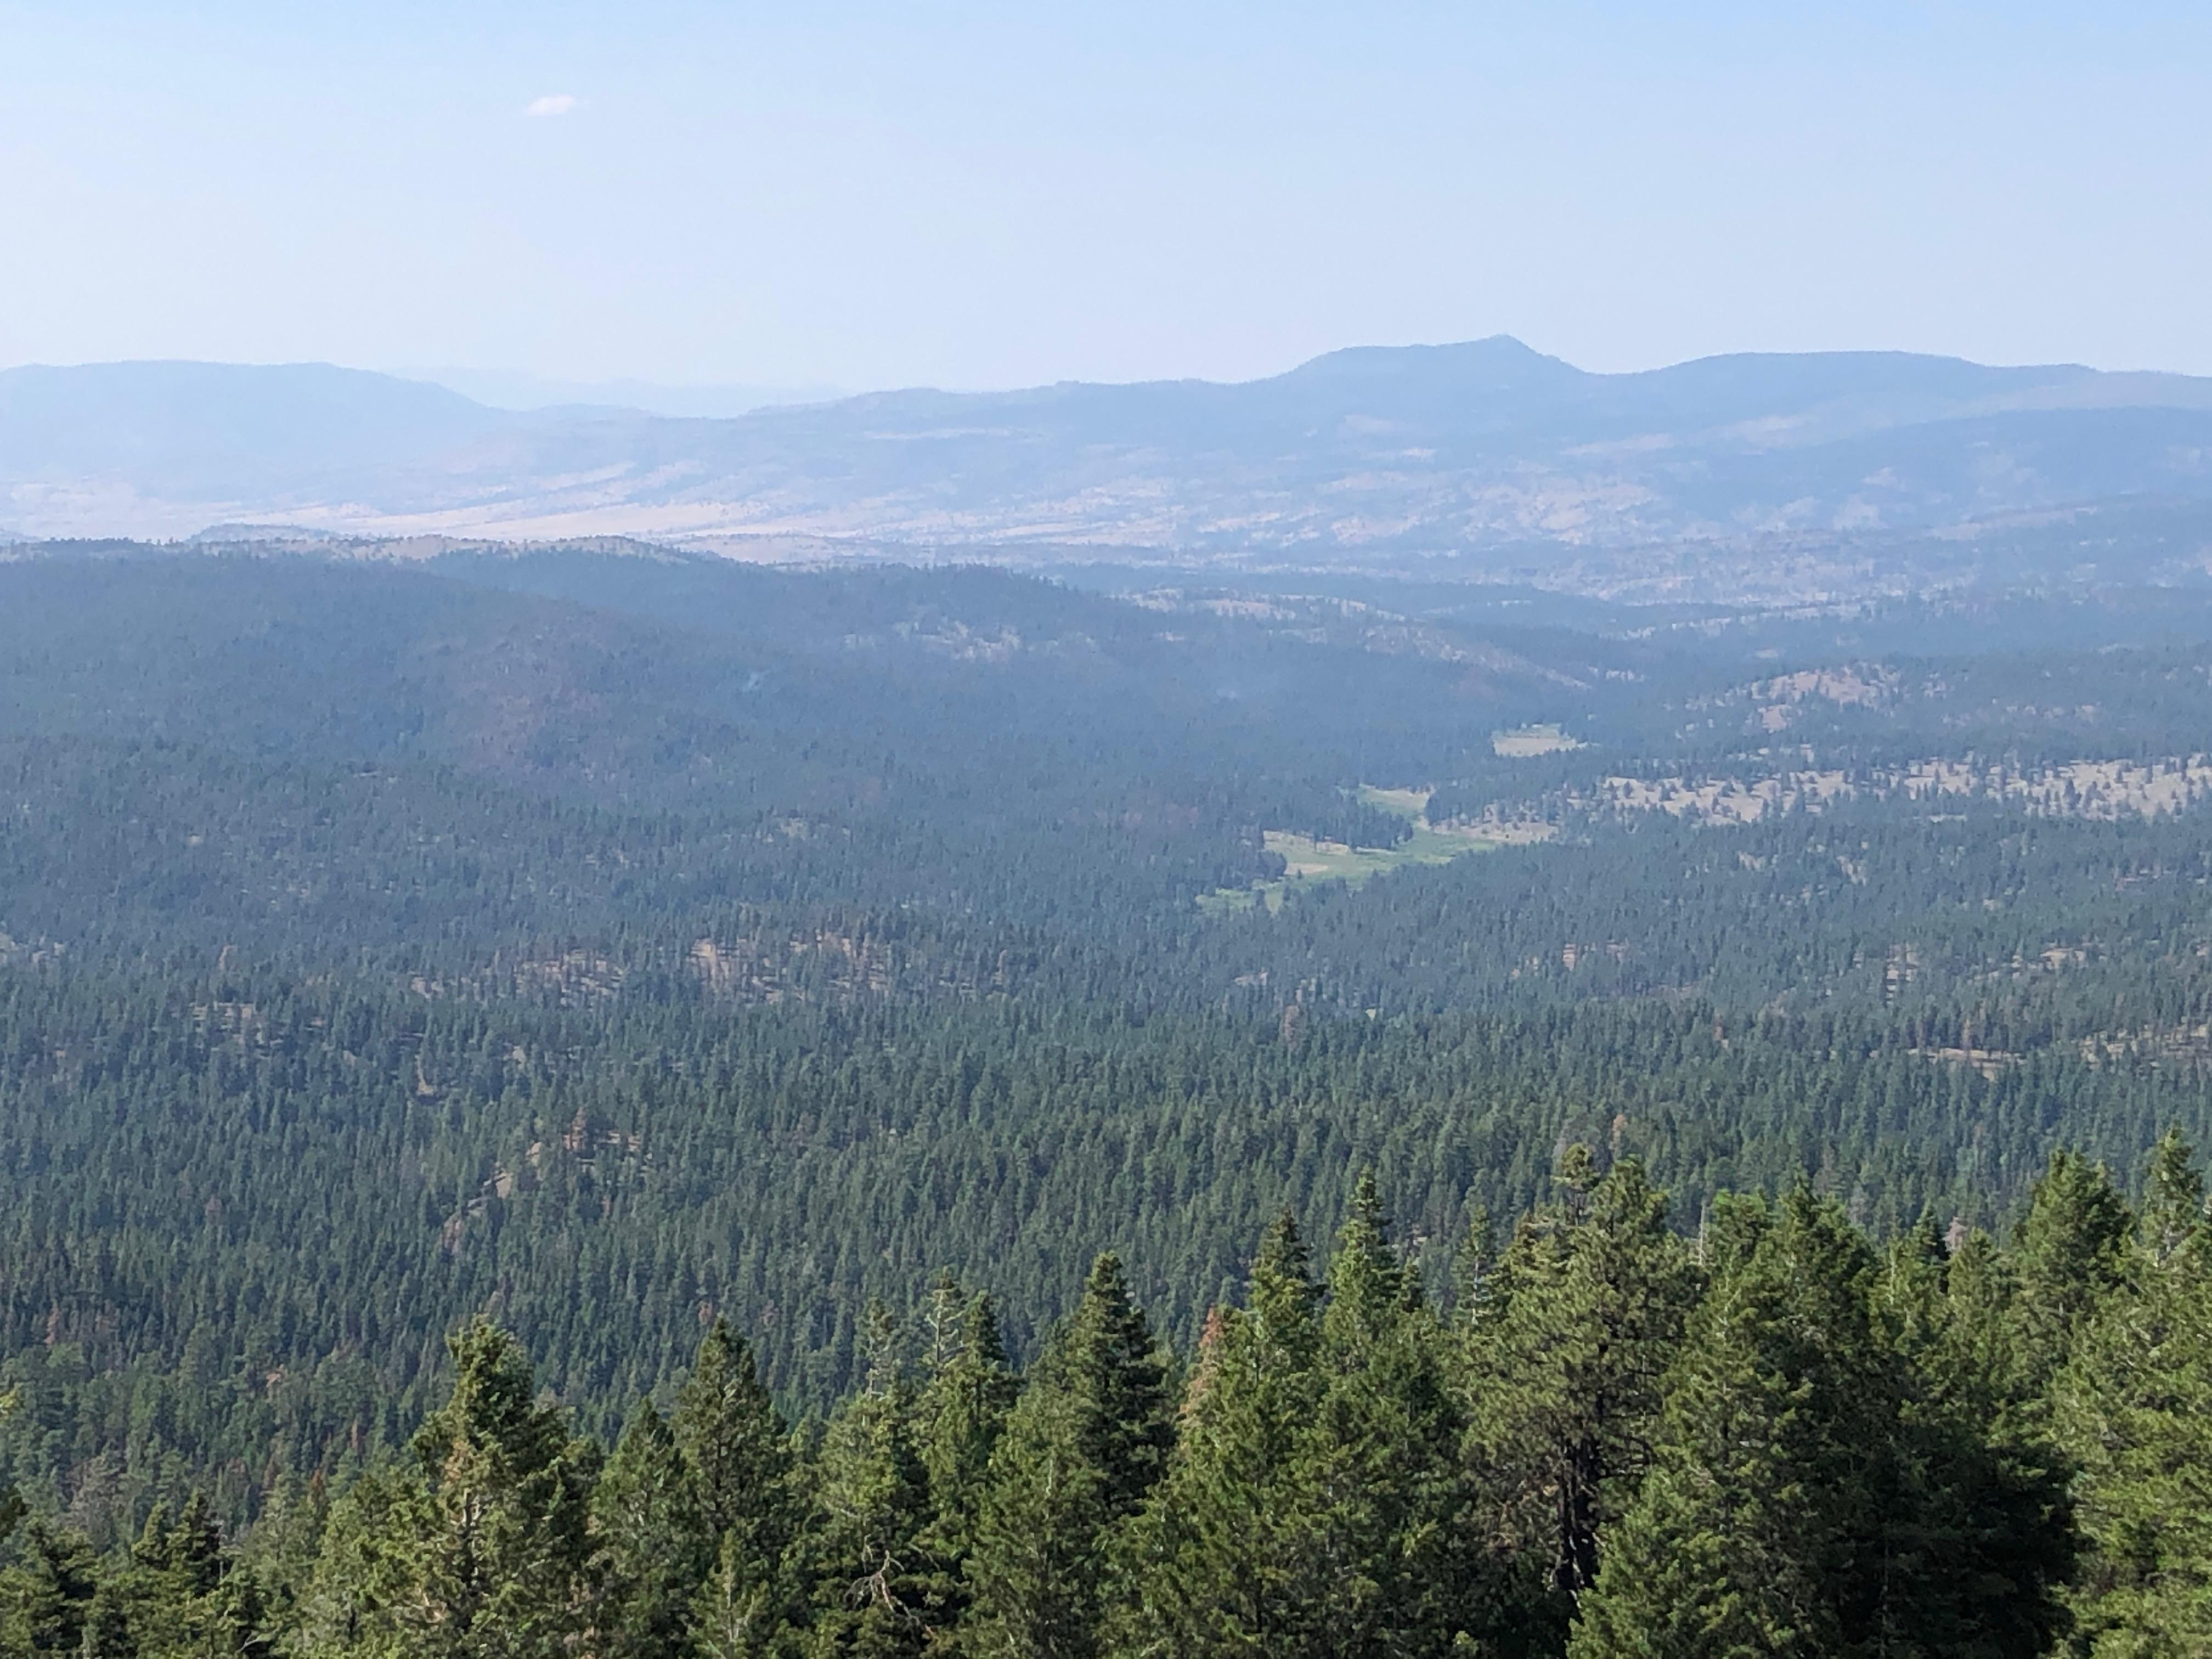 Image taken from Flagtail lookout looking in the direction of Murderers Creek 6 prescribed fire operation.